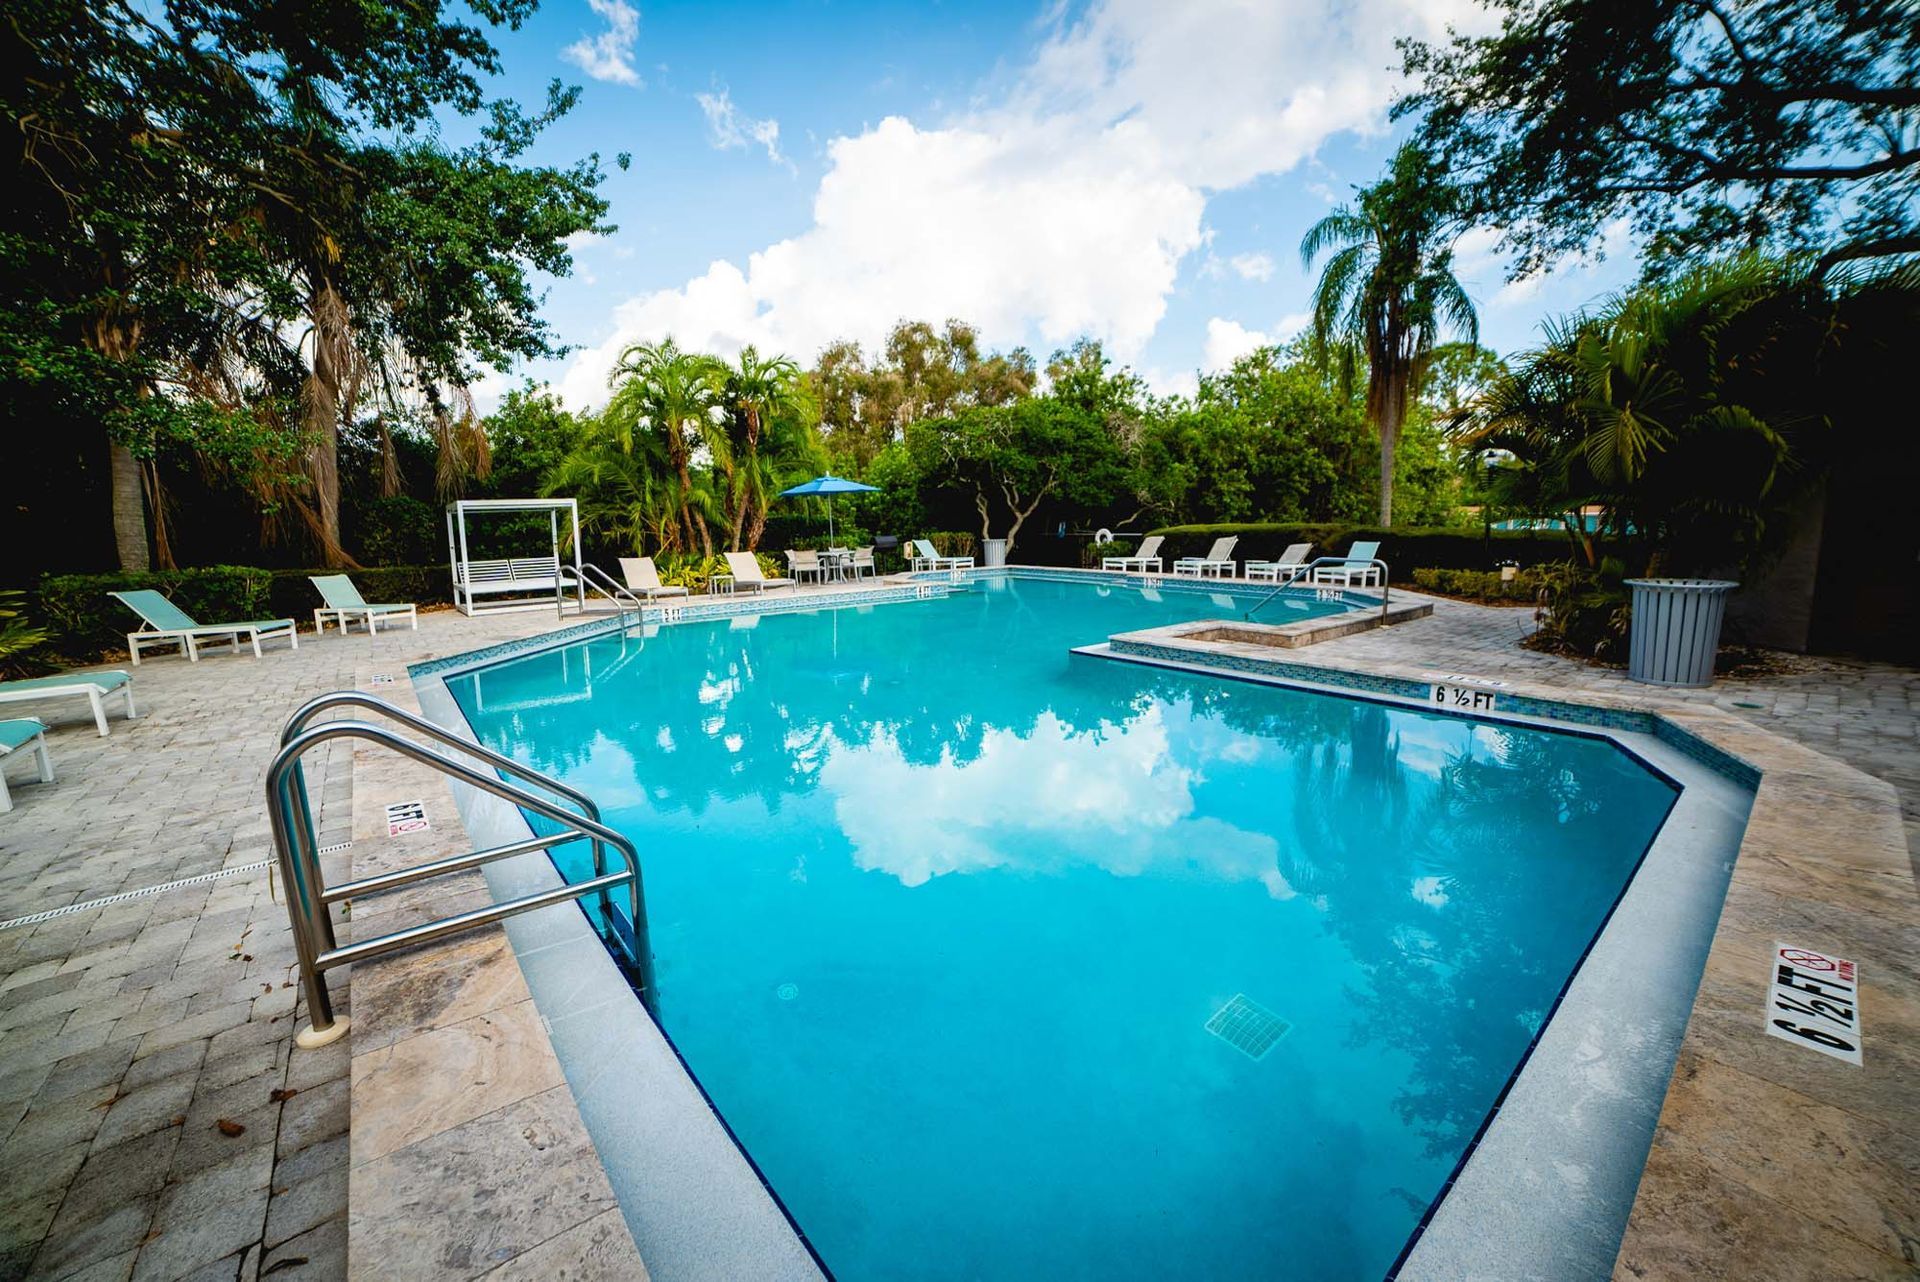 Luxury Apartments for Rent in St. Petersburg - Trellis at the Lakes - Pool with Tables, Umbrellas, Lounge Chairs, and Palm Trees.